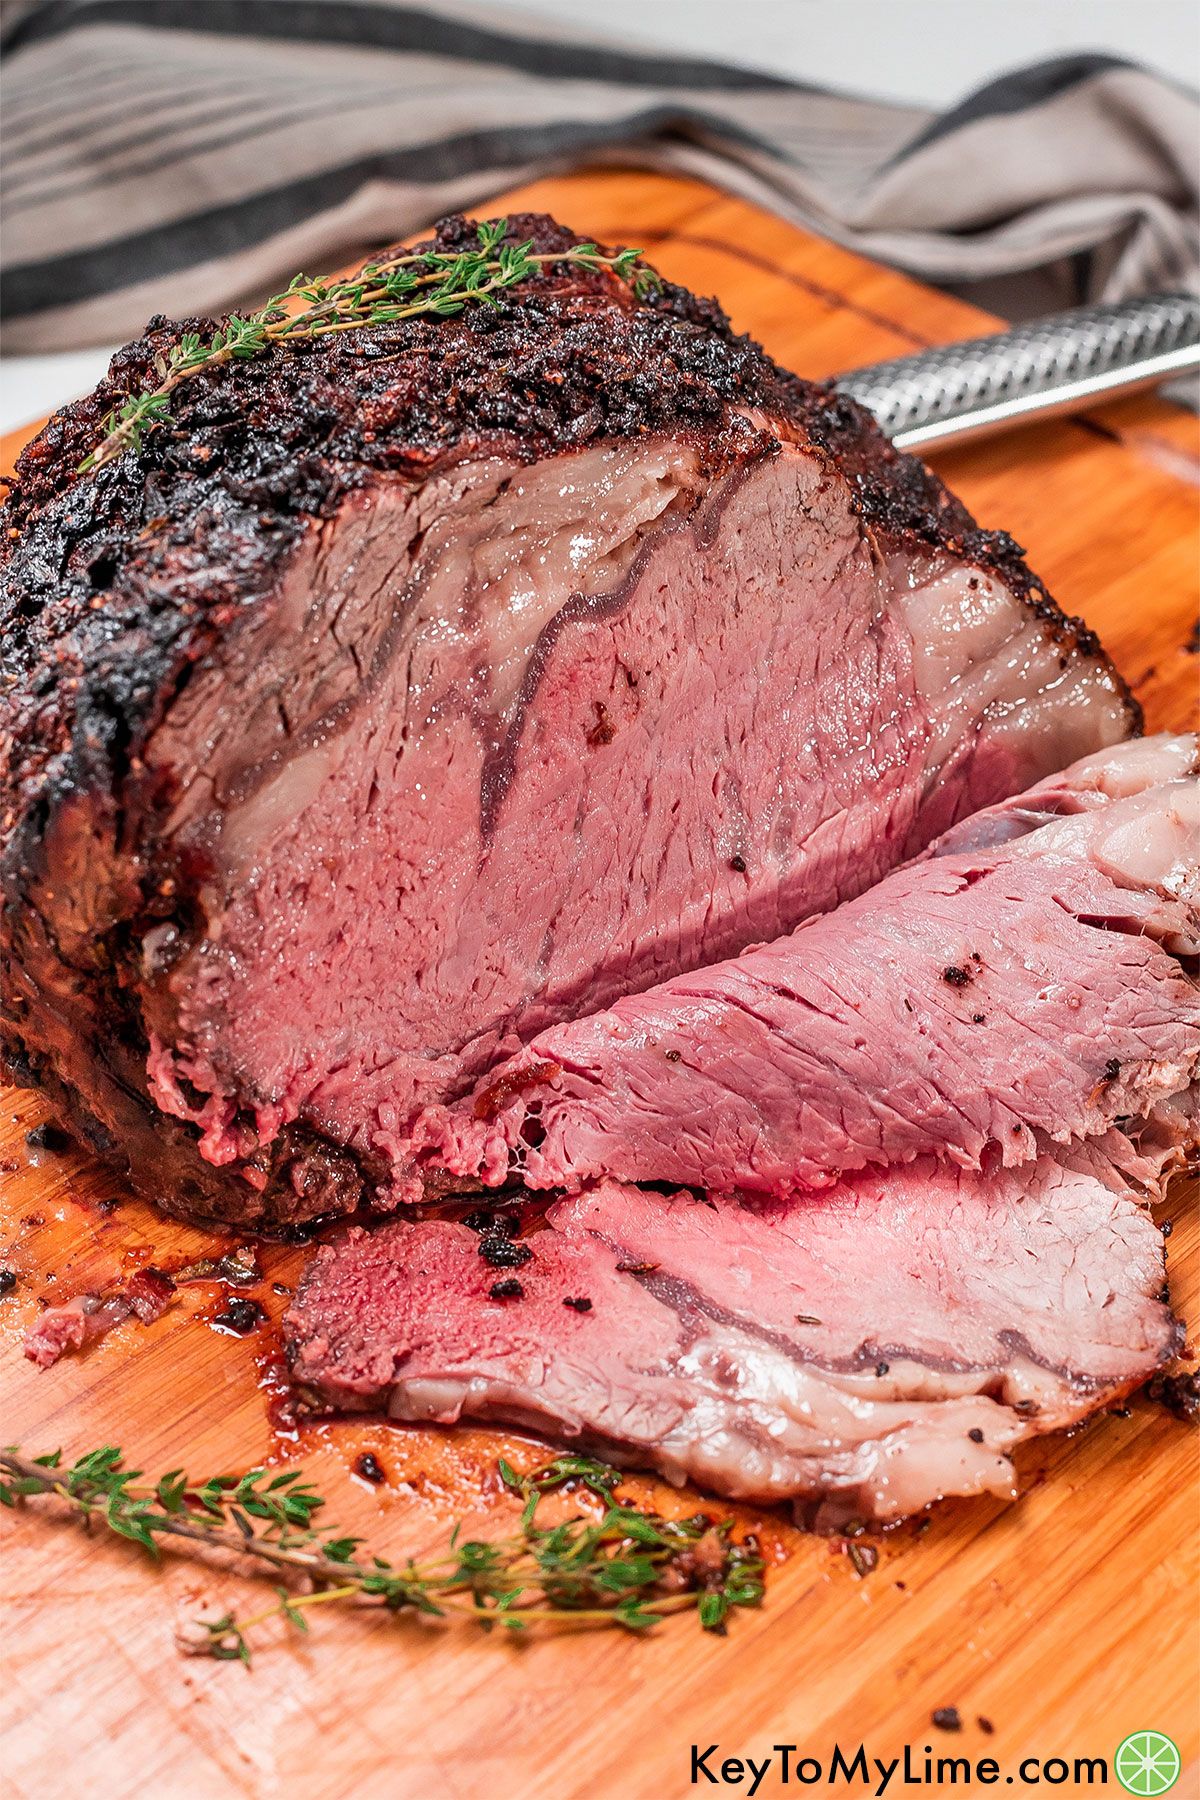 A partially cut prime rib roast with multiple thin slices on a wood cutting board.